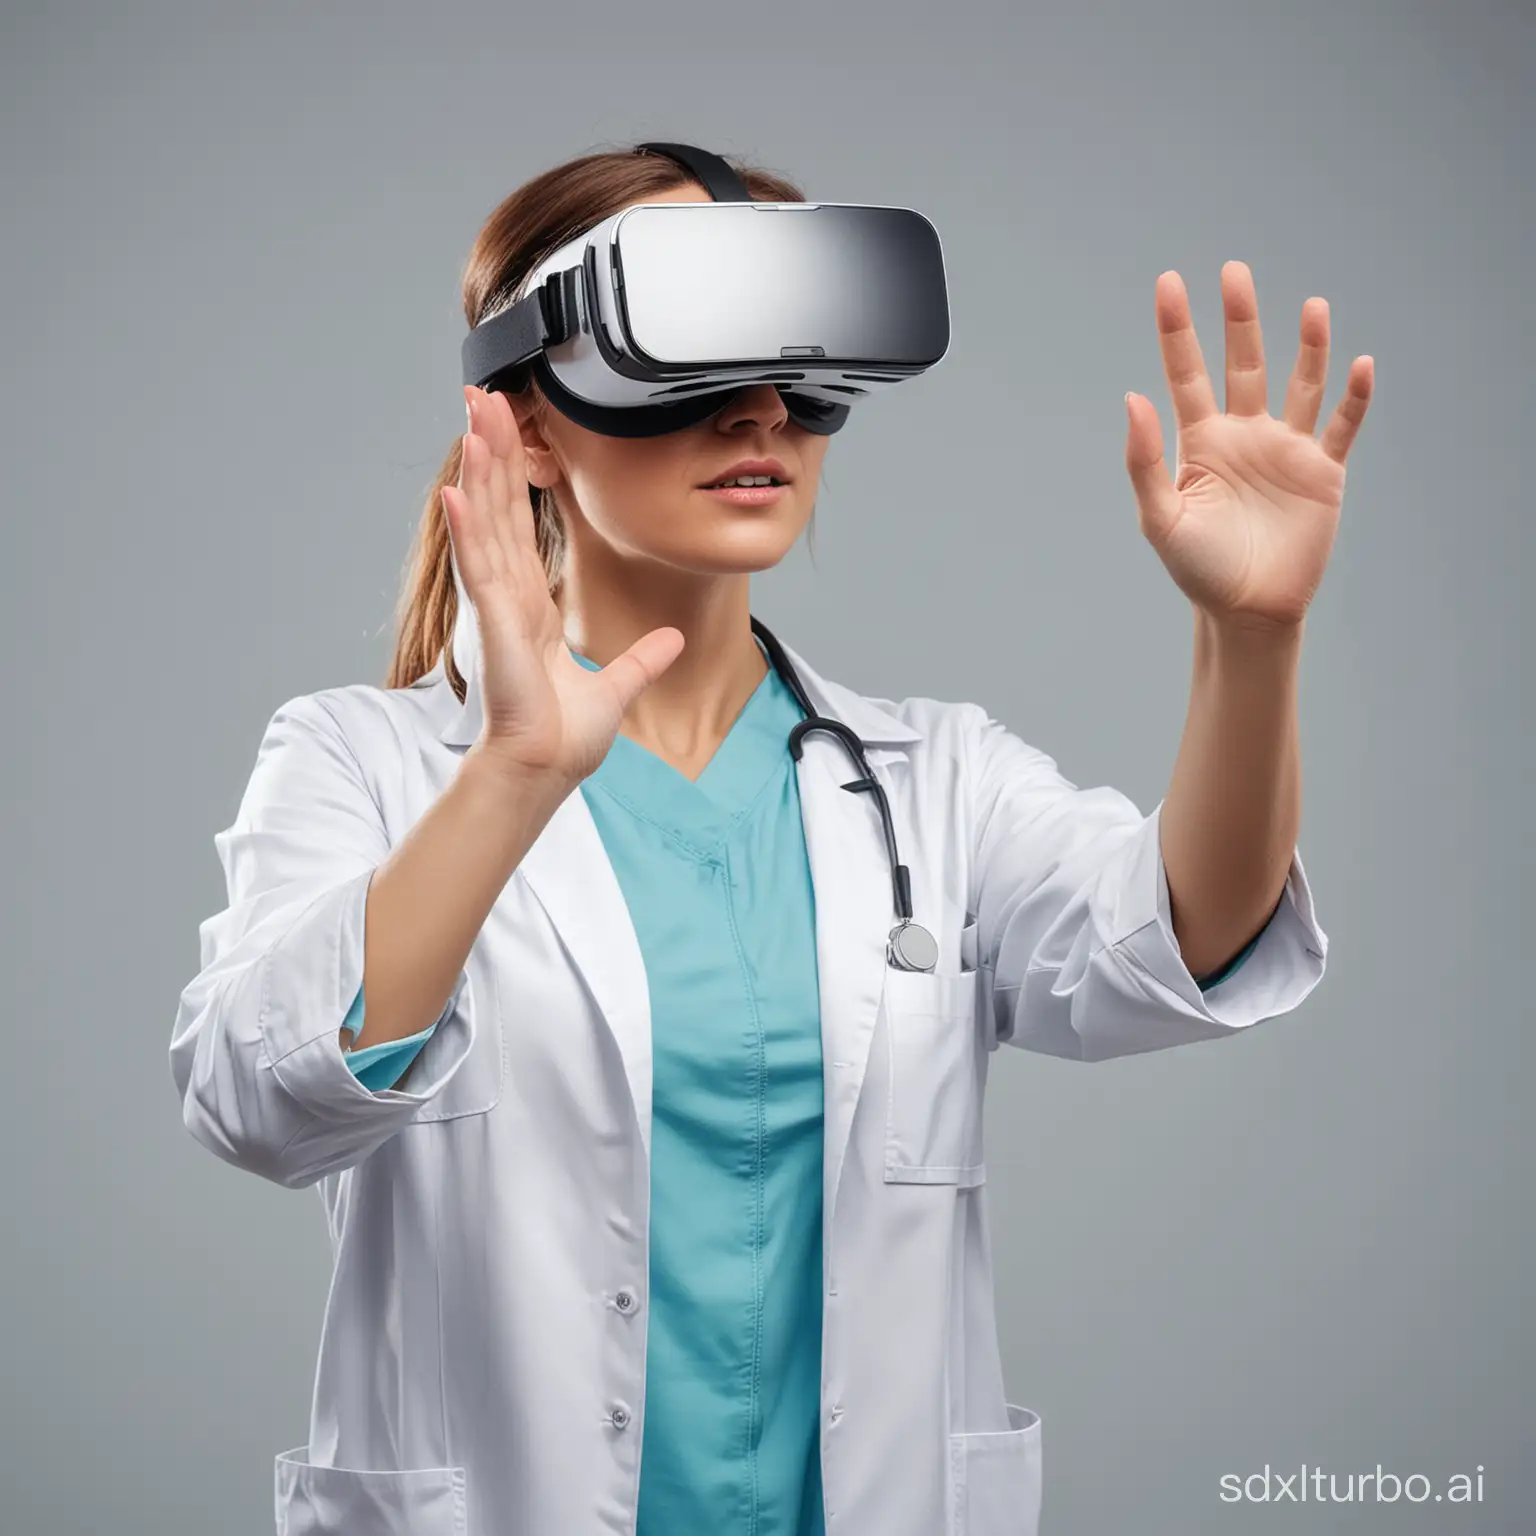 Female doctor with VR glasses